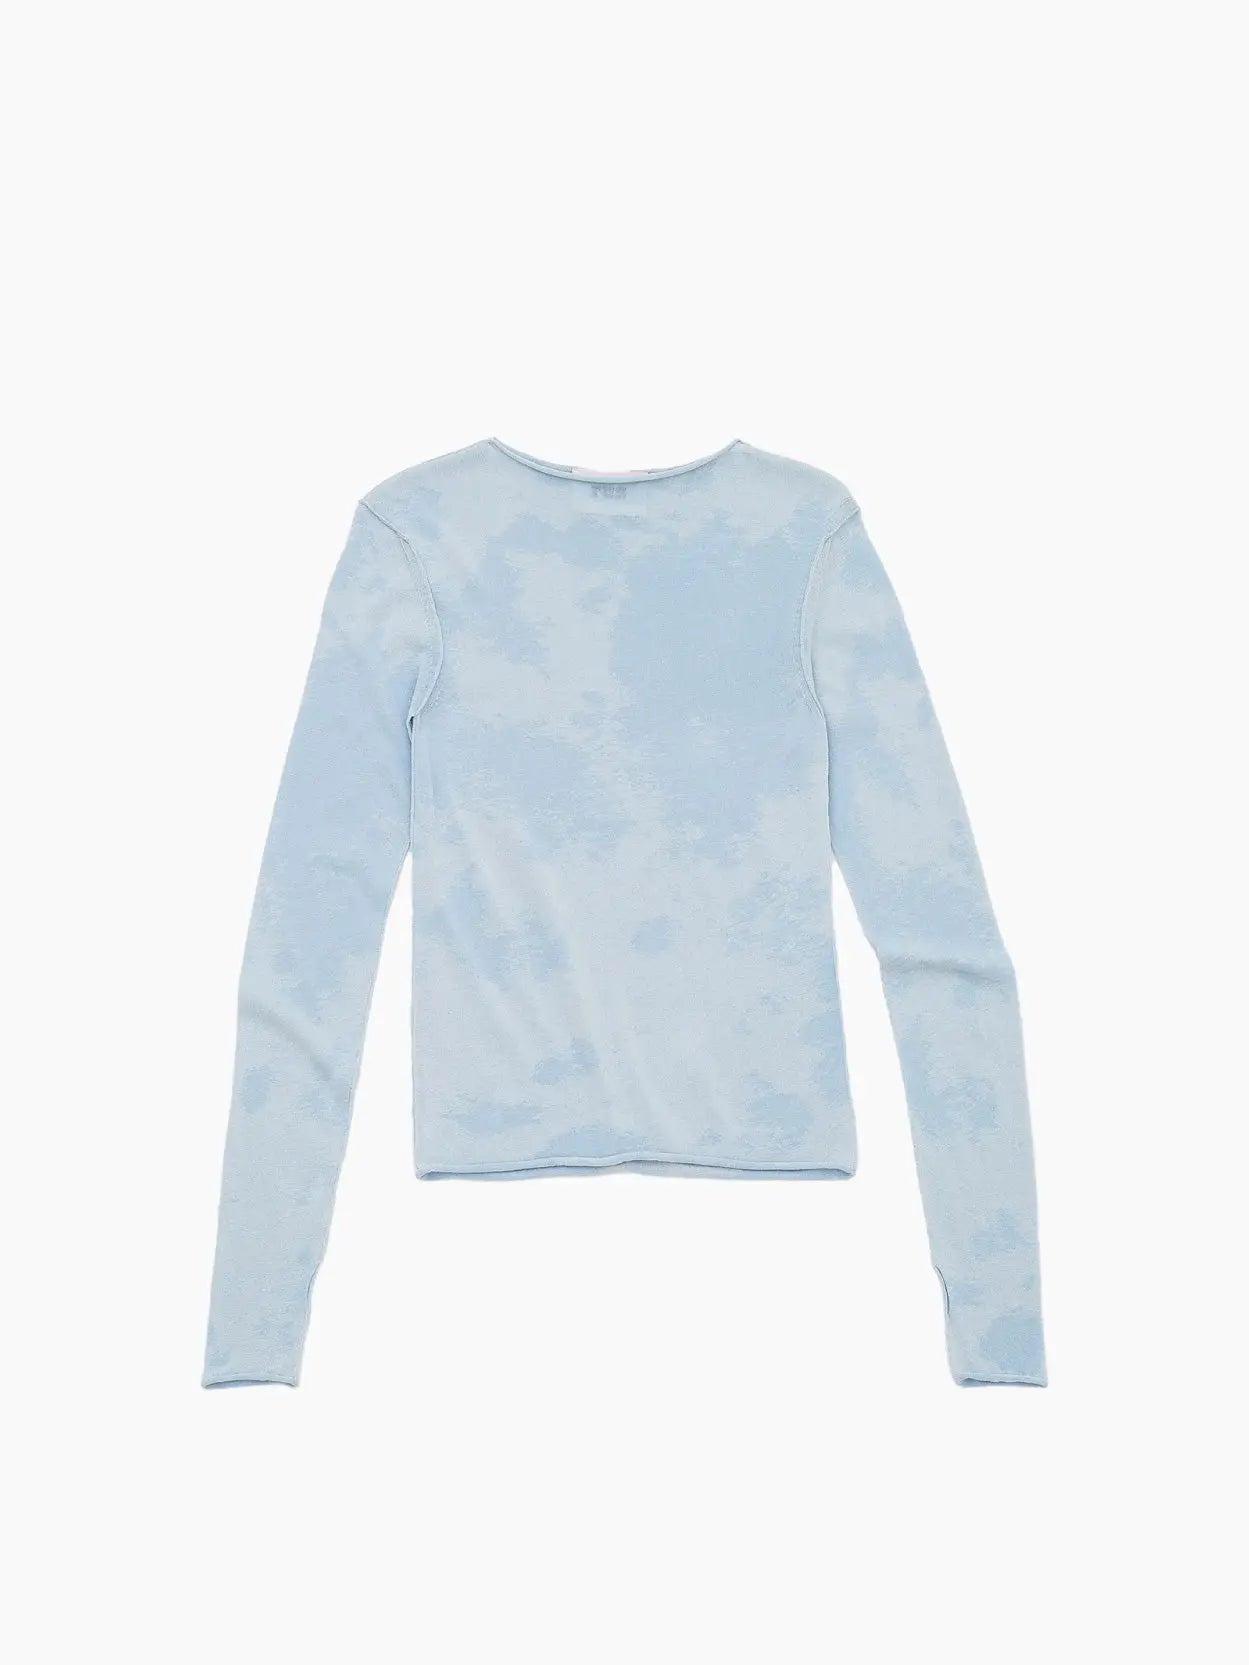 A light blue, long-sleeve Ai Sweater Blue from Rus is laid flat against a white background. The shirt appears to have a subtle, cloud-like pattern and features a crew neckline with a slim fit design, capturing the vibrant essence of Barcelona.